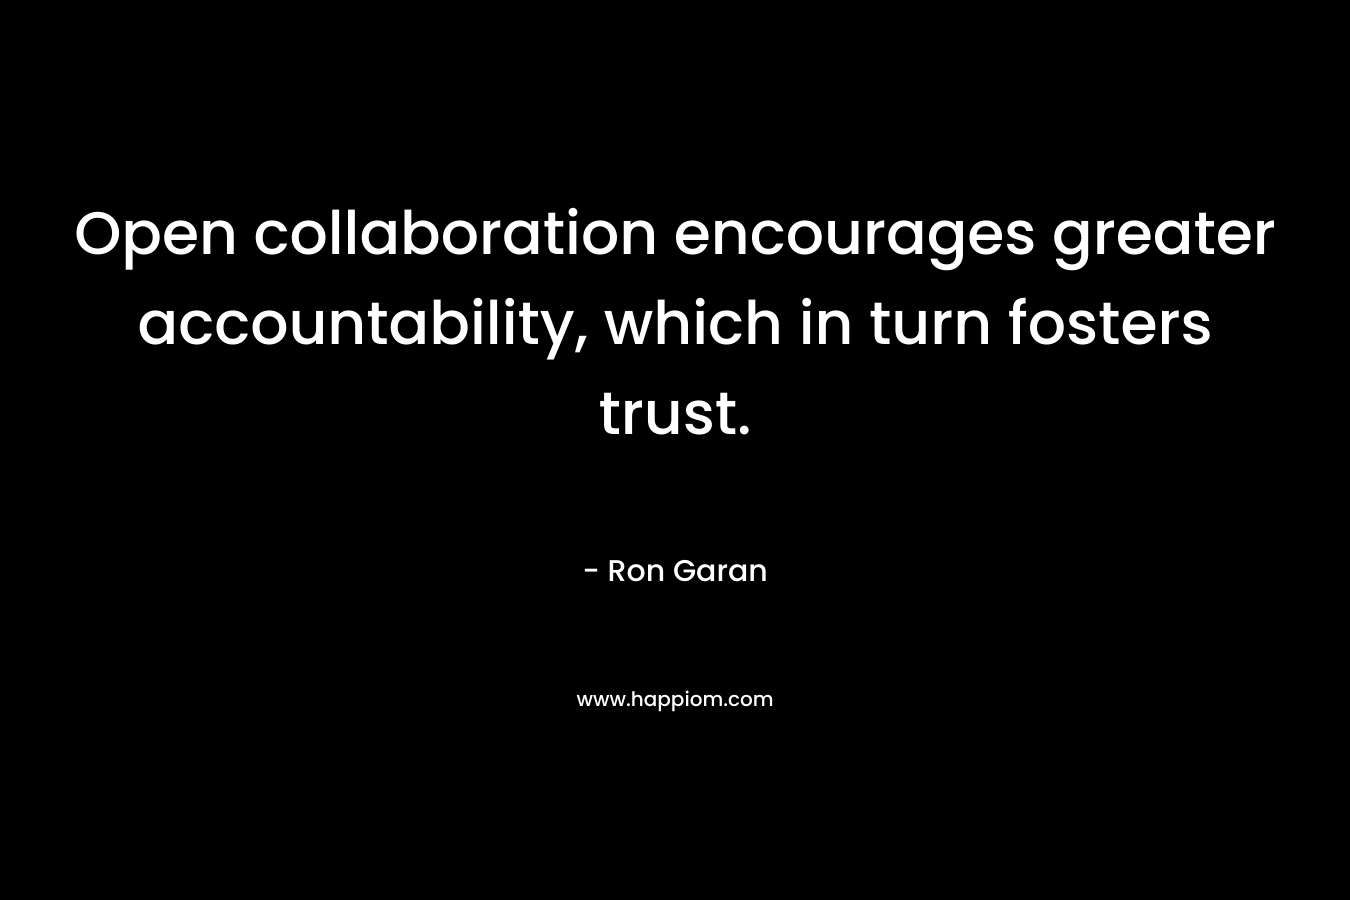 Open collaboration encourages greater accountability, which in turn fosters trust. – Ron Garan